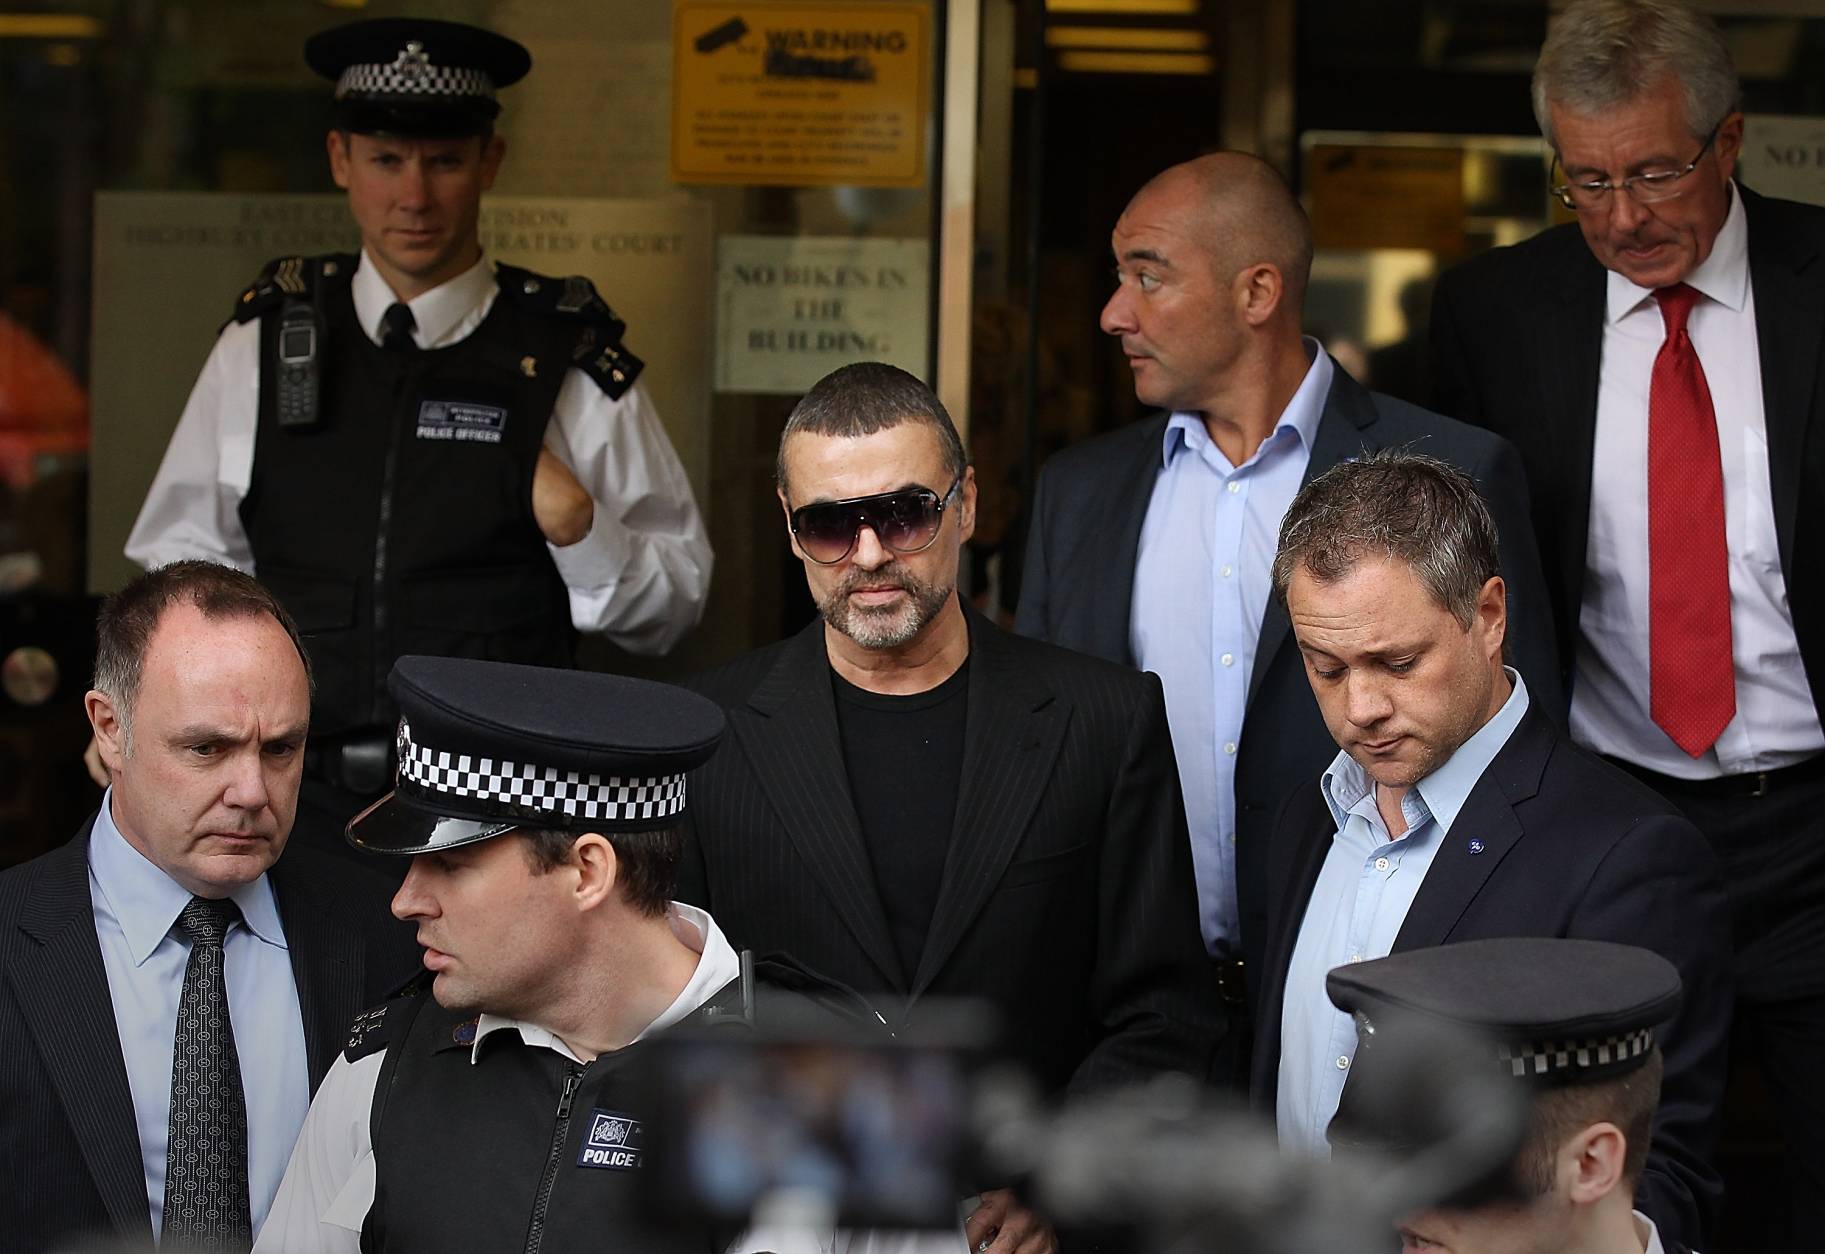 LONDON, ENGLAND - AUGUST 24:  Singer George Michael (C) leaves  Highbury Corner Magistrates Court surrounded by press and police on August 24, 2010 in London, England. Mr Michael pleaded guilty to driving under the influence of drugs and possessing cannabis after he crashed his car into a photo processing shop in London on July 4, 2010.  (Photo by Peter Macdiarmid/Getty Images)